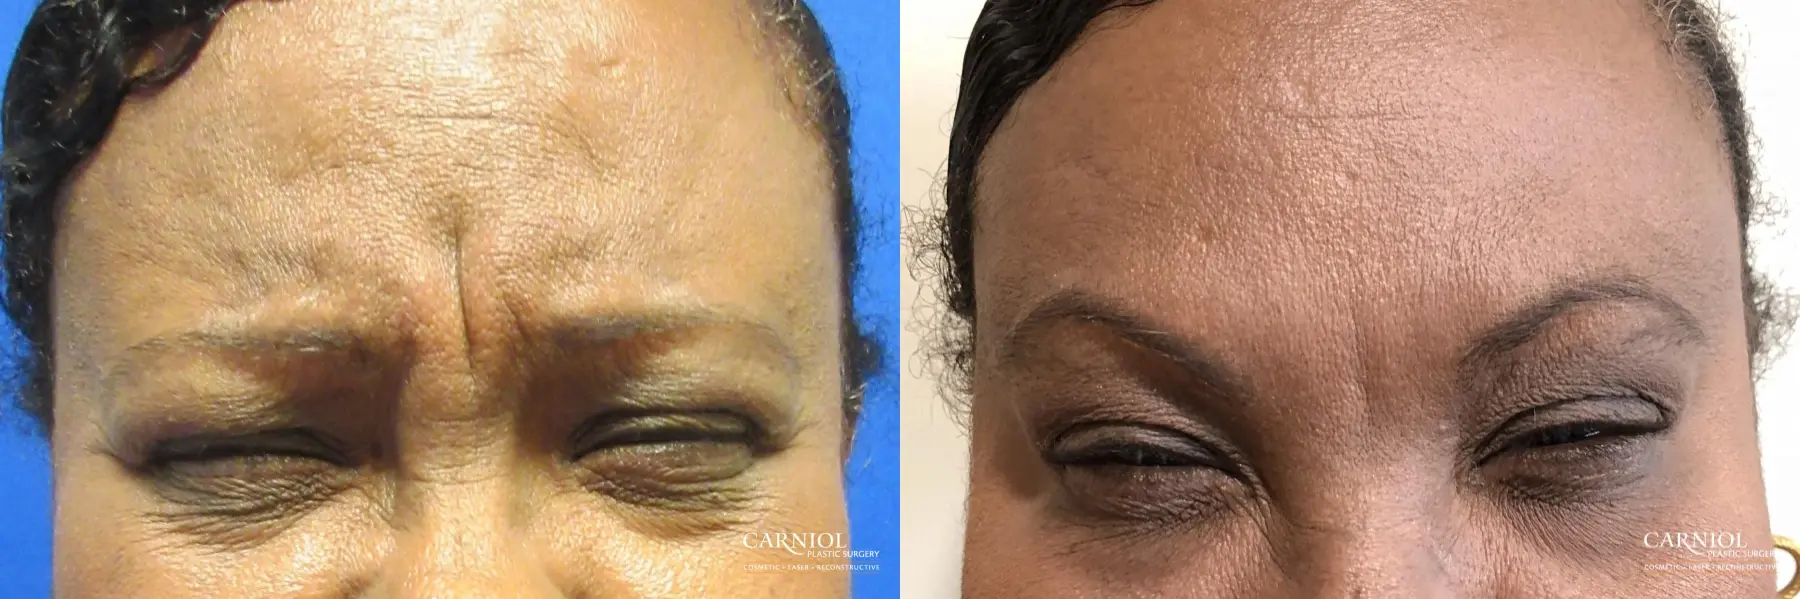 BOTOX® Cosmetic: Patient 3 - Before and After  